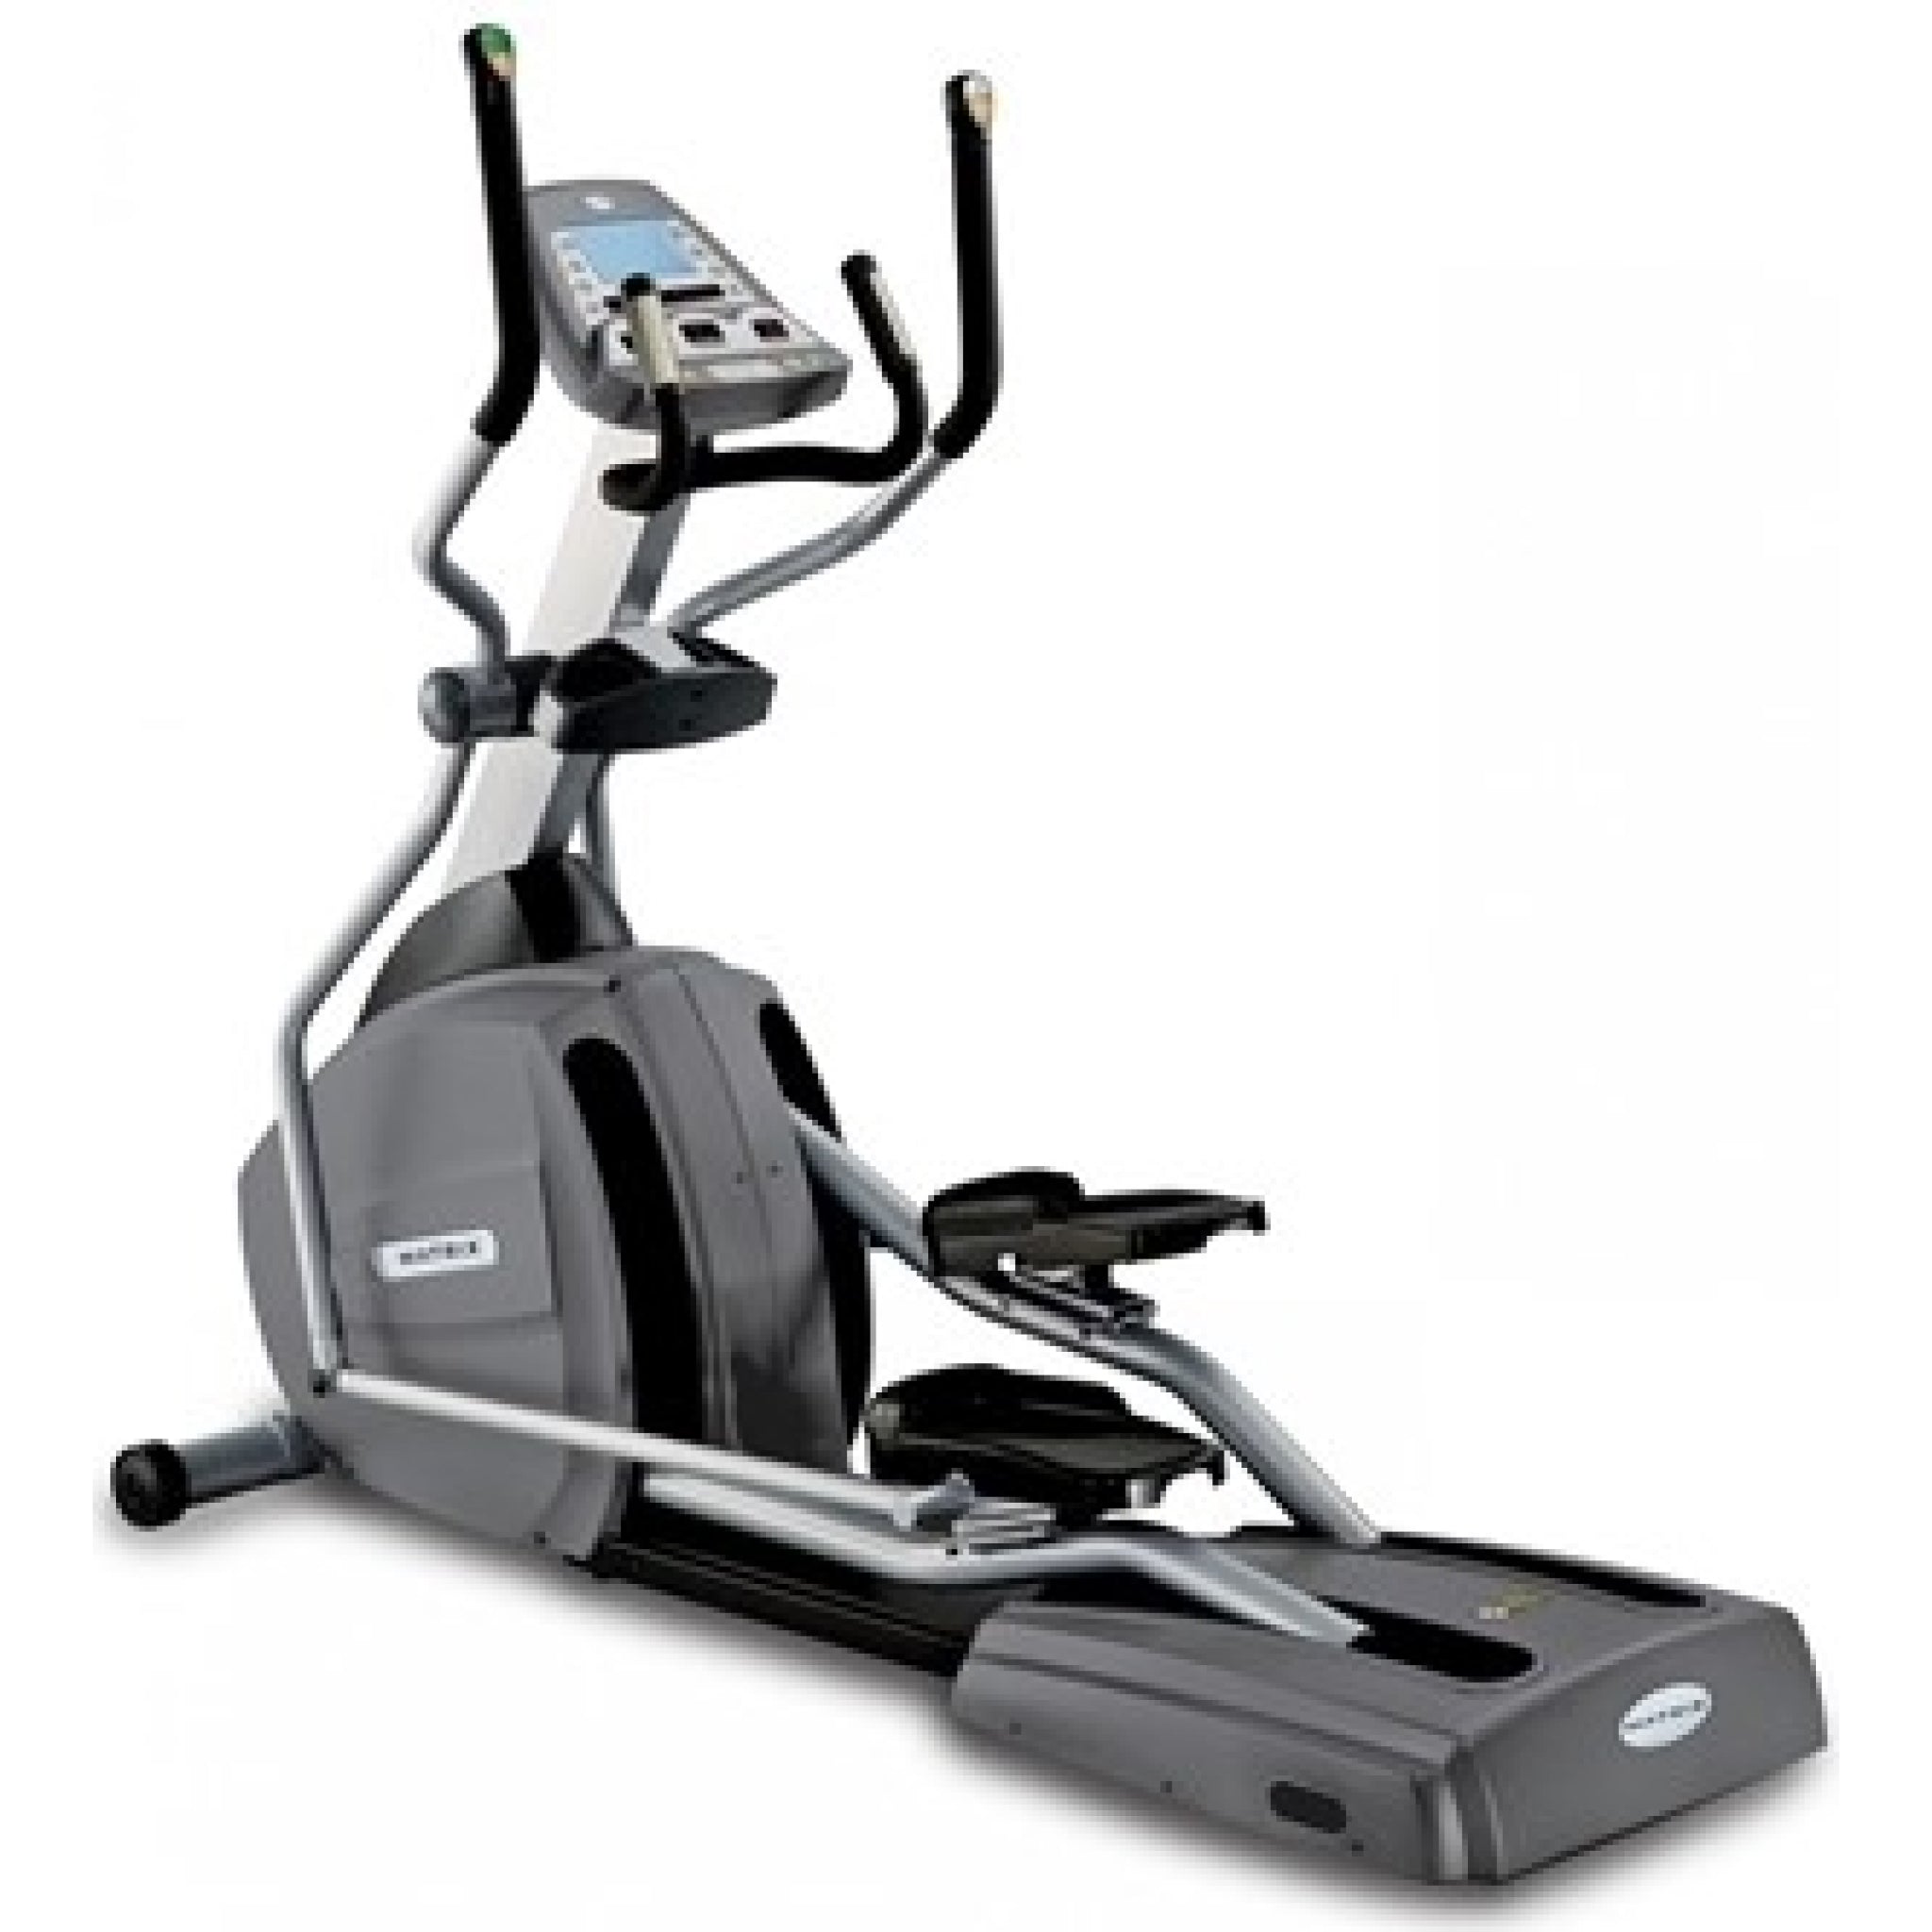 The Matrix E3x Elliptical Trainer with an LED TV Screen